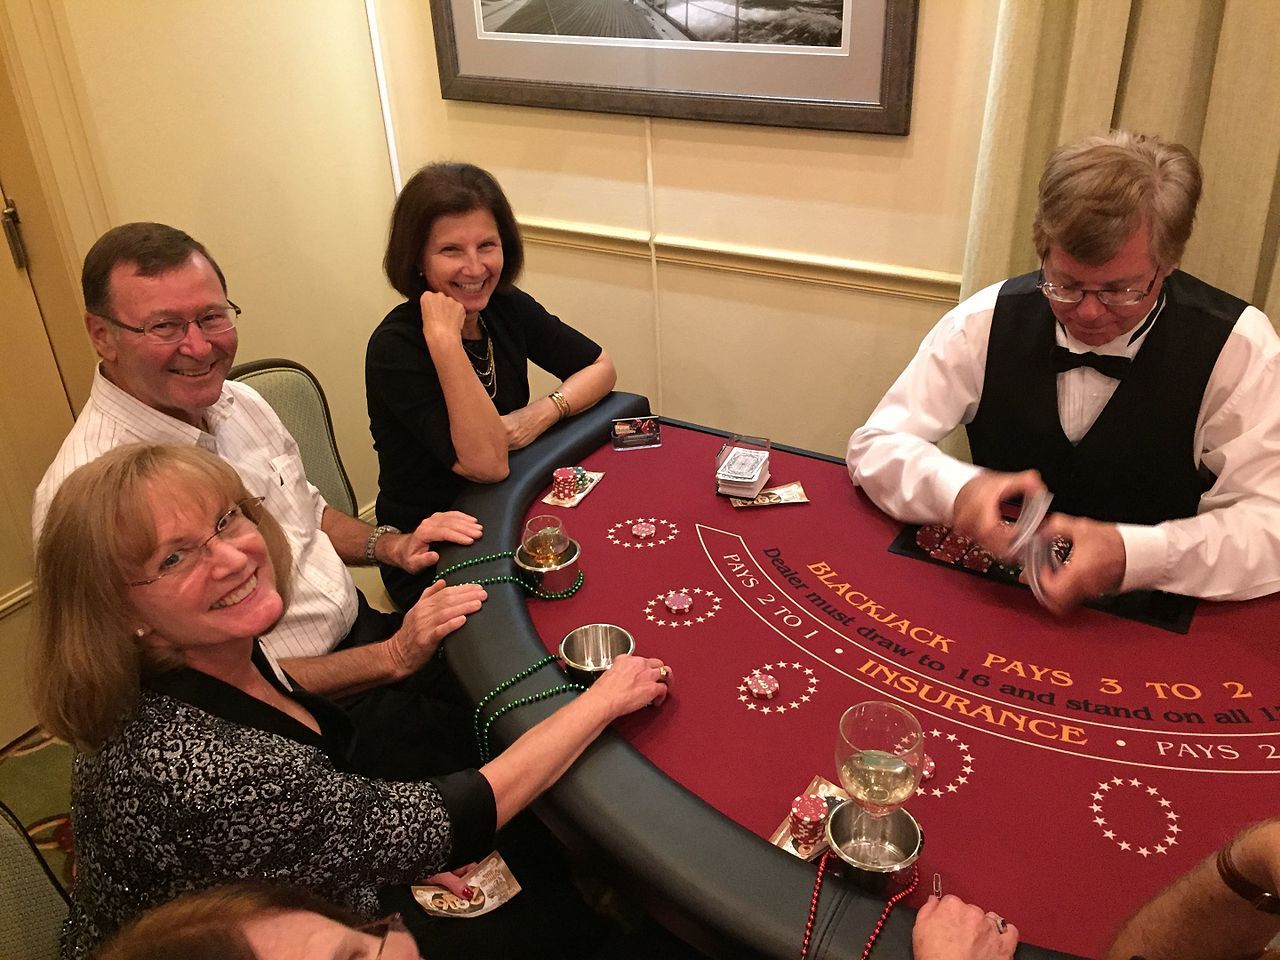 A blackjack dealer shuffles at a blackjack table as three players smile for the camera.